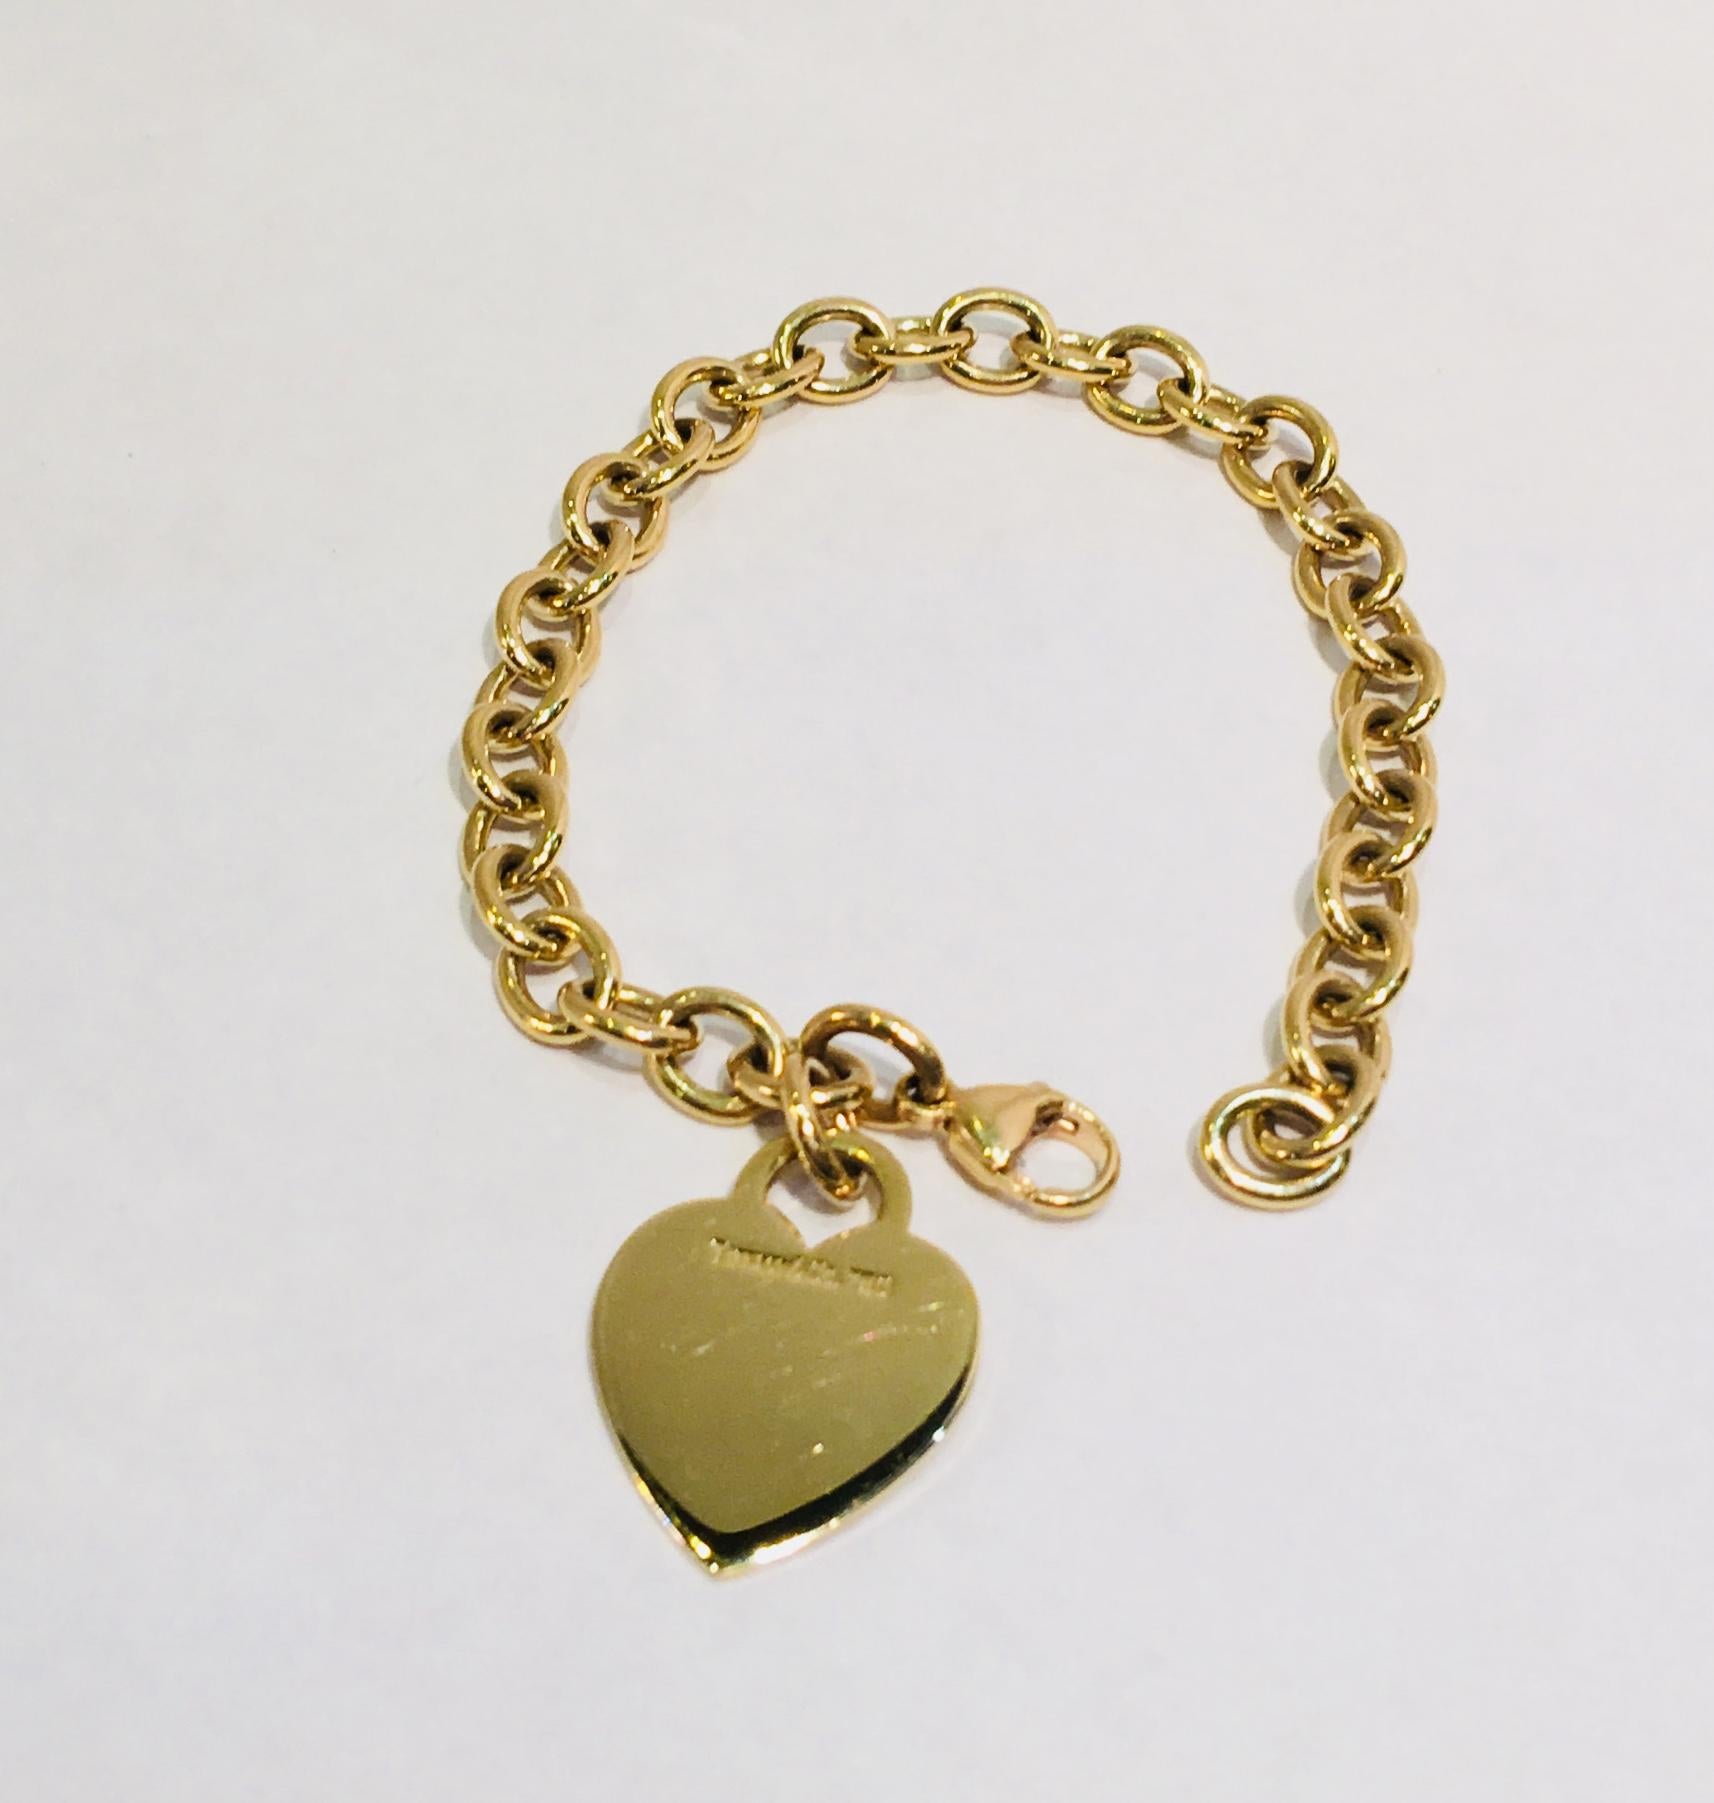 Classic, timeless authentic Tiffany & Co. solid 18 karat yellow gold oval link chain bracelet with a heart shaped charm.  A prefect gift for Valentine's Day!  Heart has a high polish, blank front and is hallmarked on the back, 